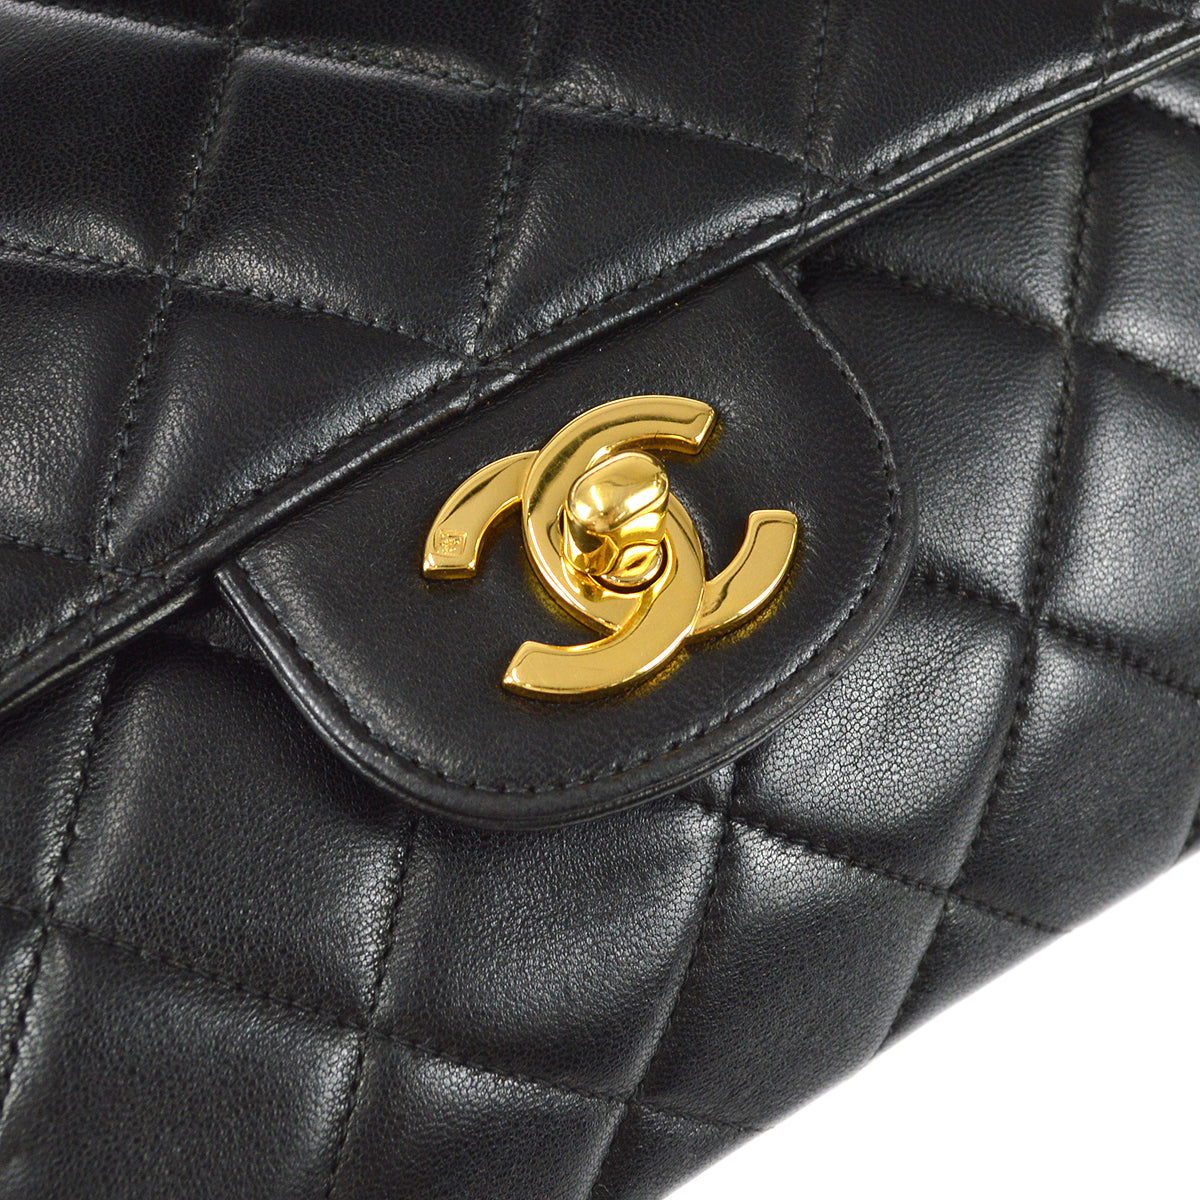 Chanel Vintage second hand prices